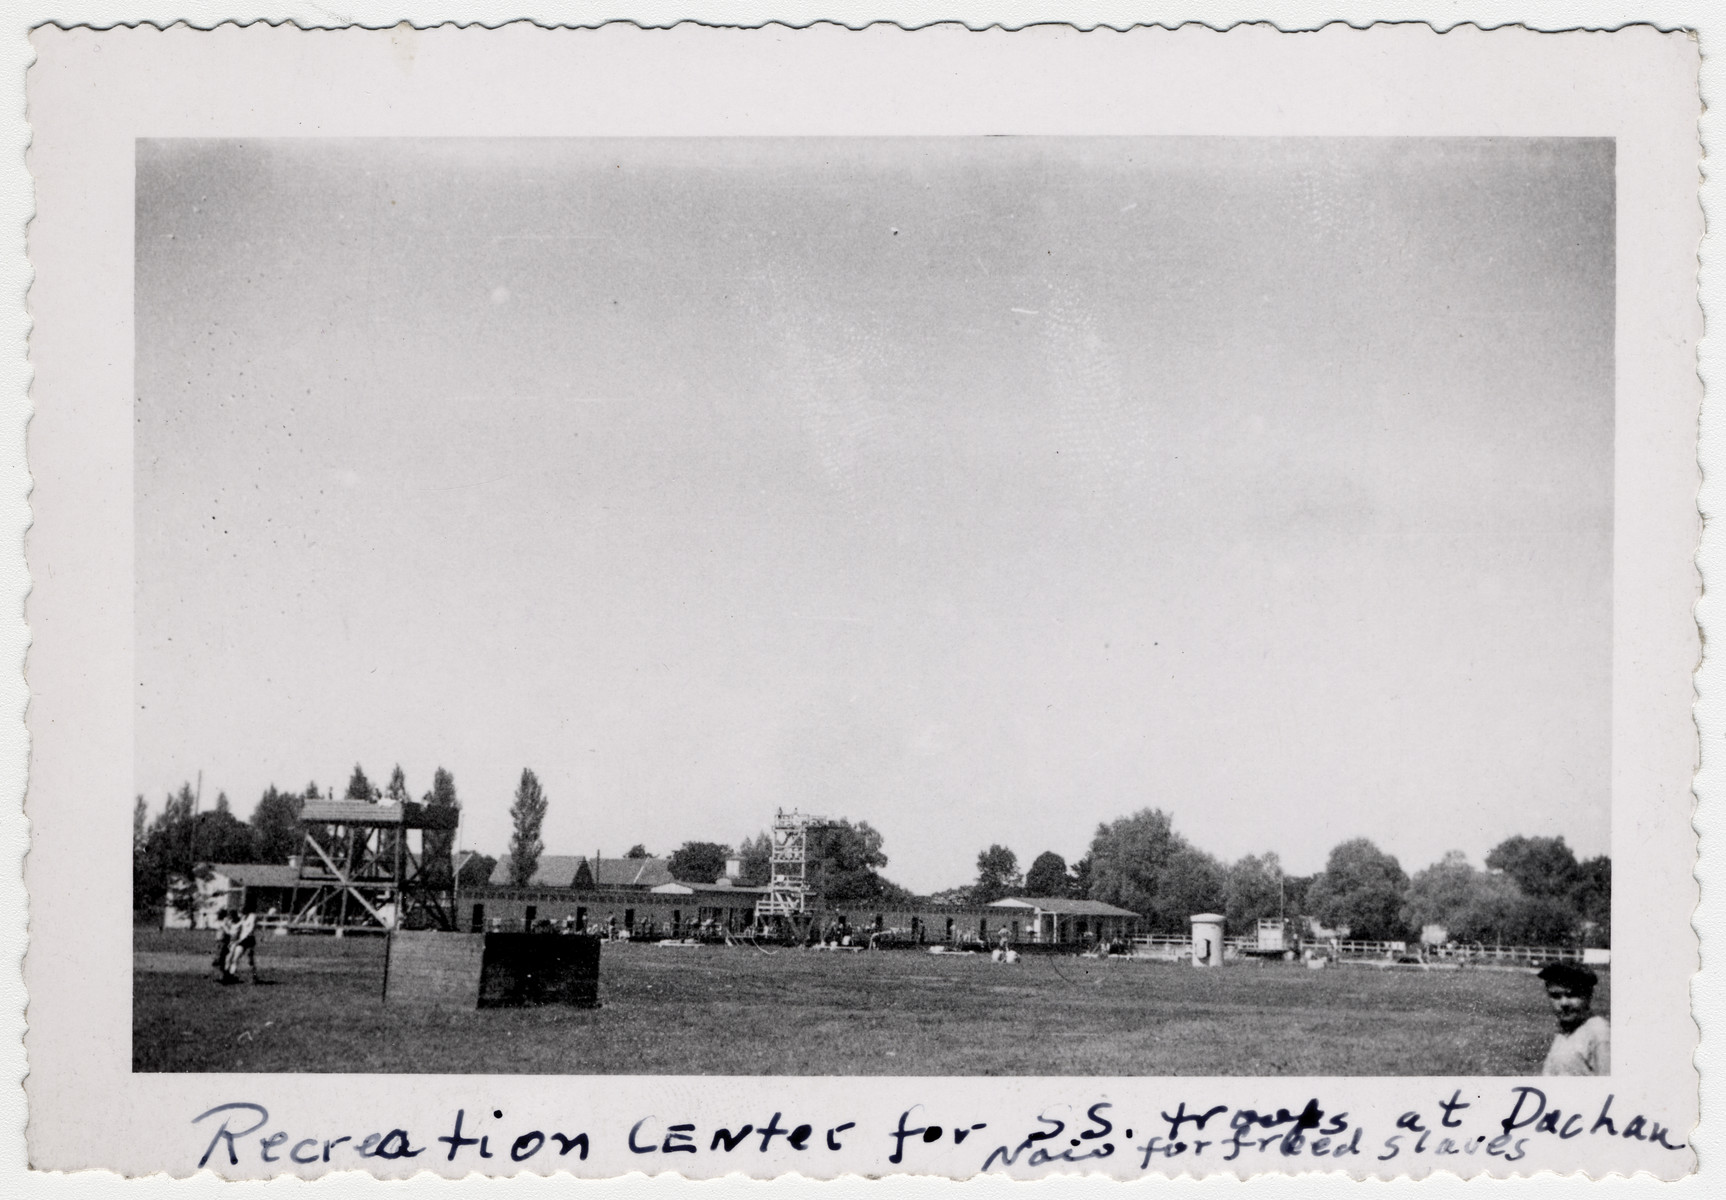 View of the SS recreation fields in Dachau following liberation.

The original caption reads "Recreation center for SS troops at Dachau now for freed slaves".